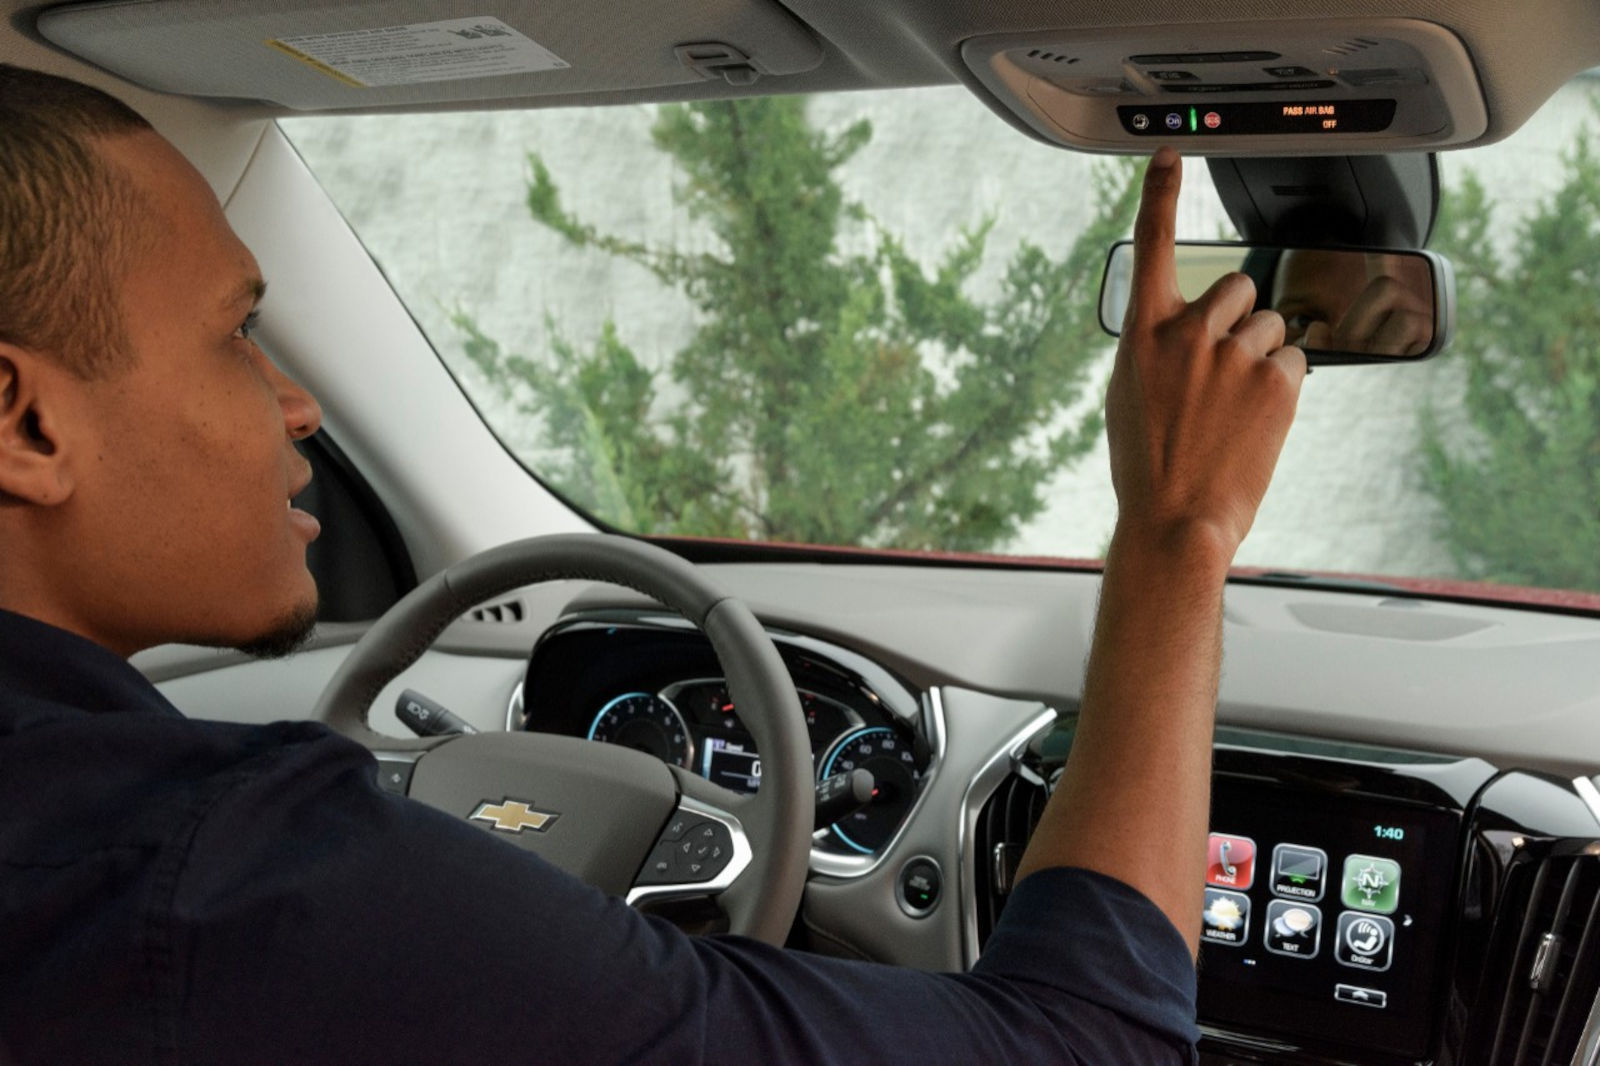 GM Elevates Standard Vehicle Safety with OnStar Across Its 2025 Fleet